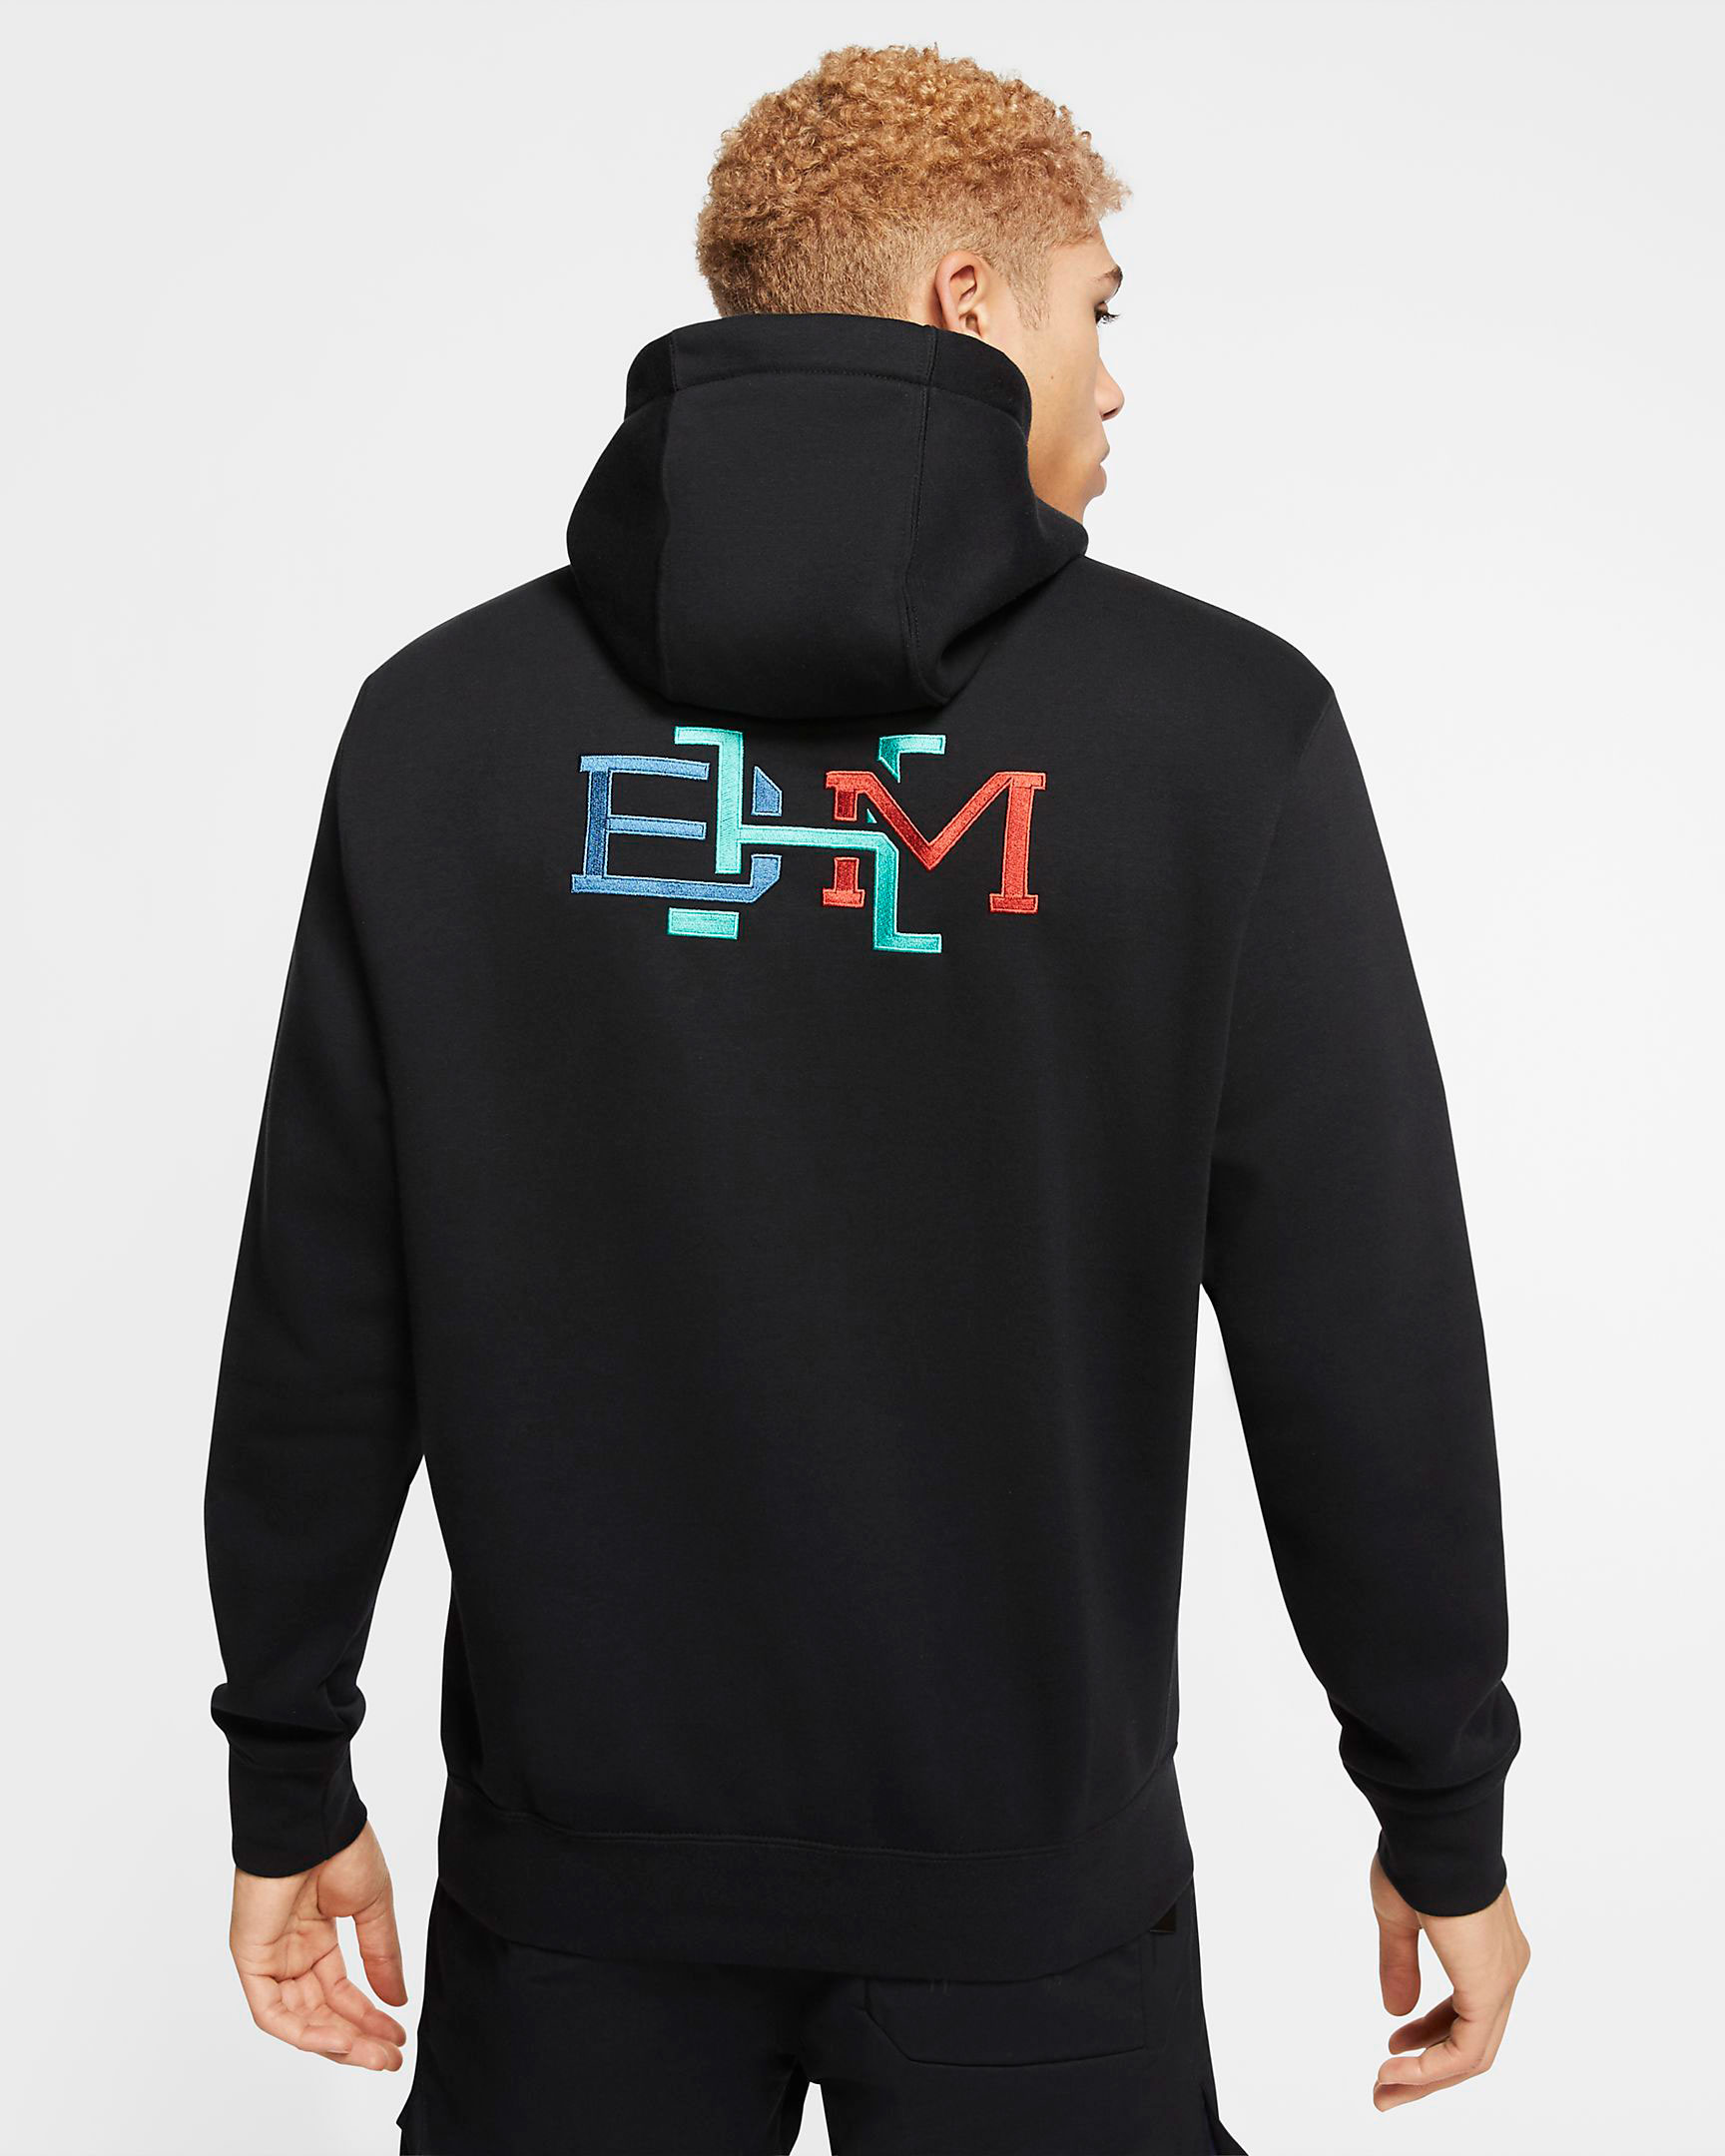 Nike BHM 2020 Sneakers and Clothing | SneakerFits.com